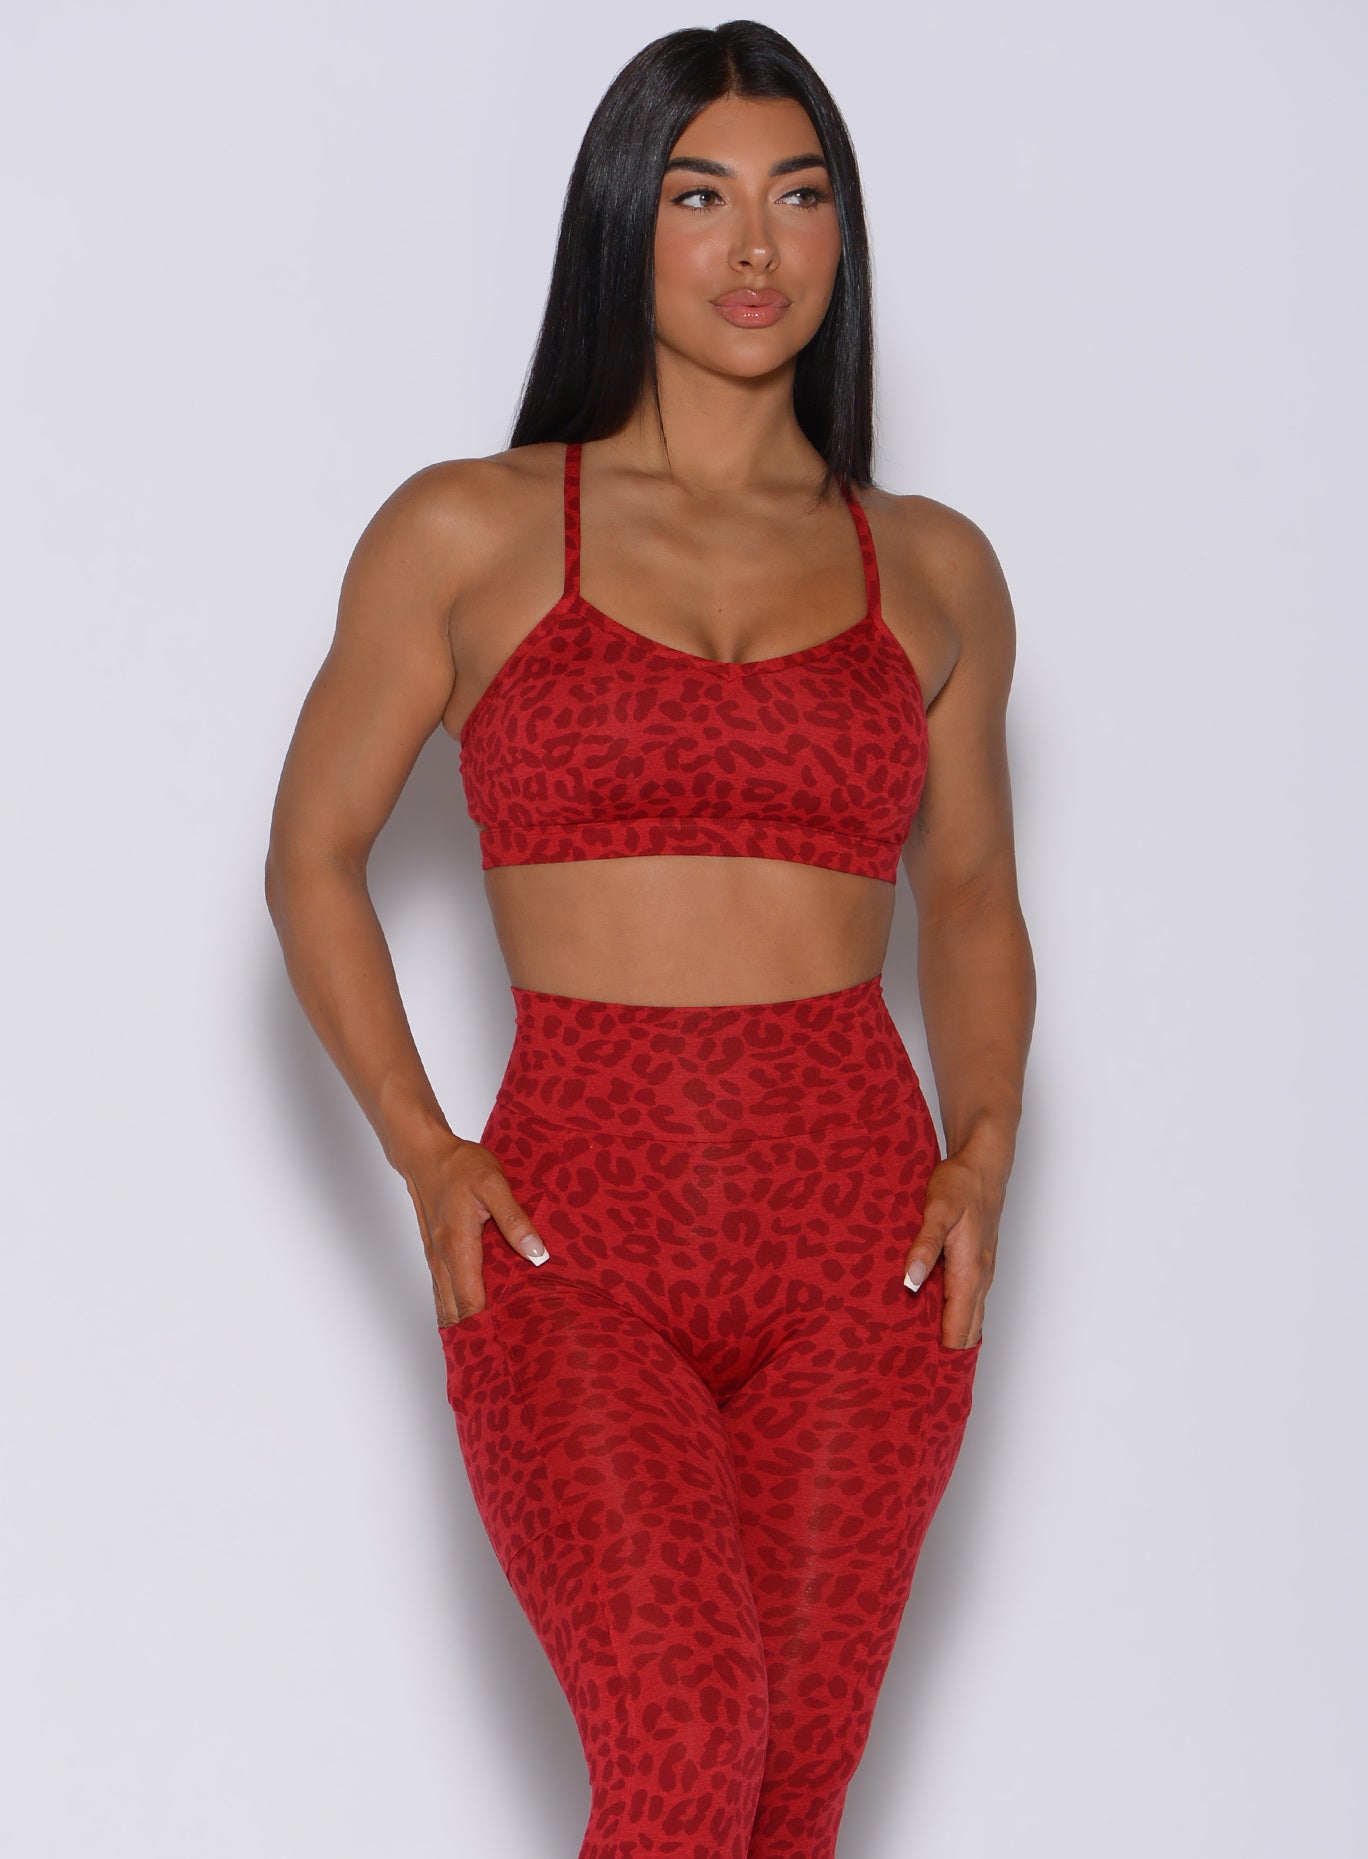 Front profile view of a model in our pumped sports bra in red cheetah color and matching leggings